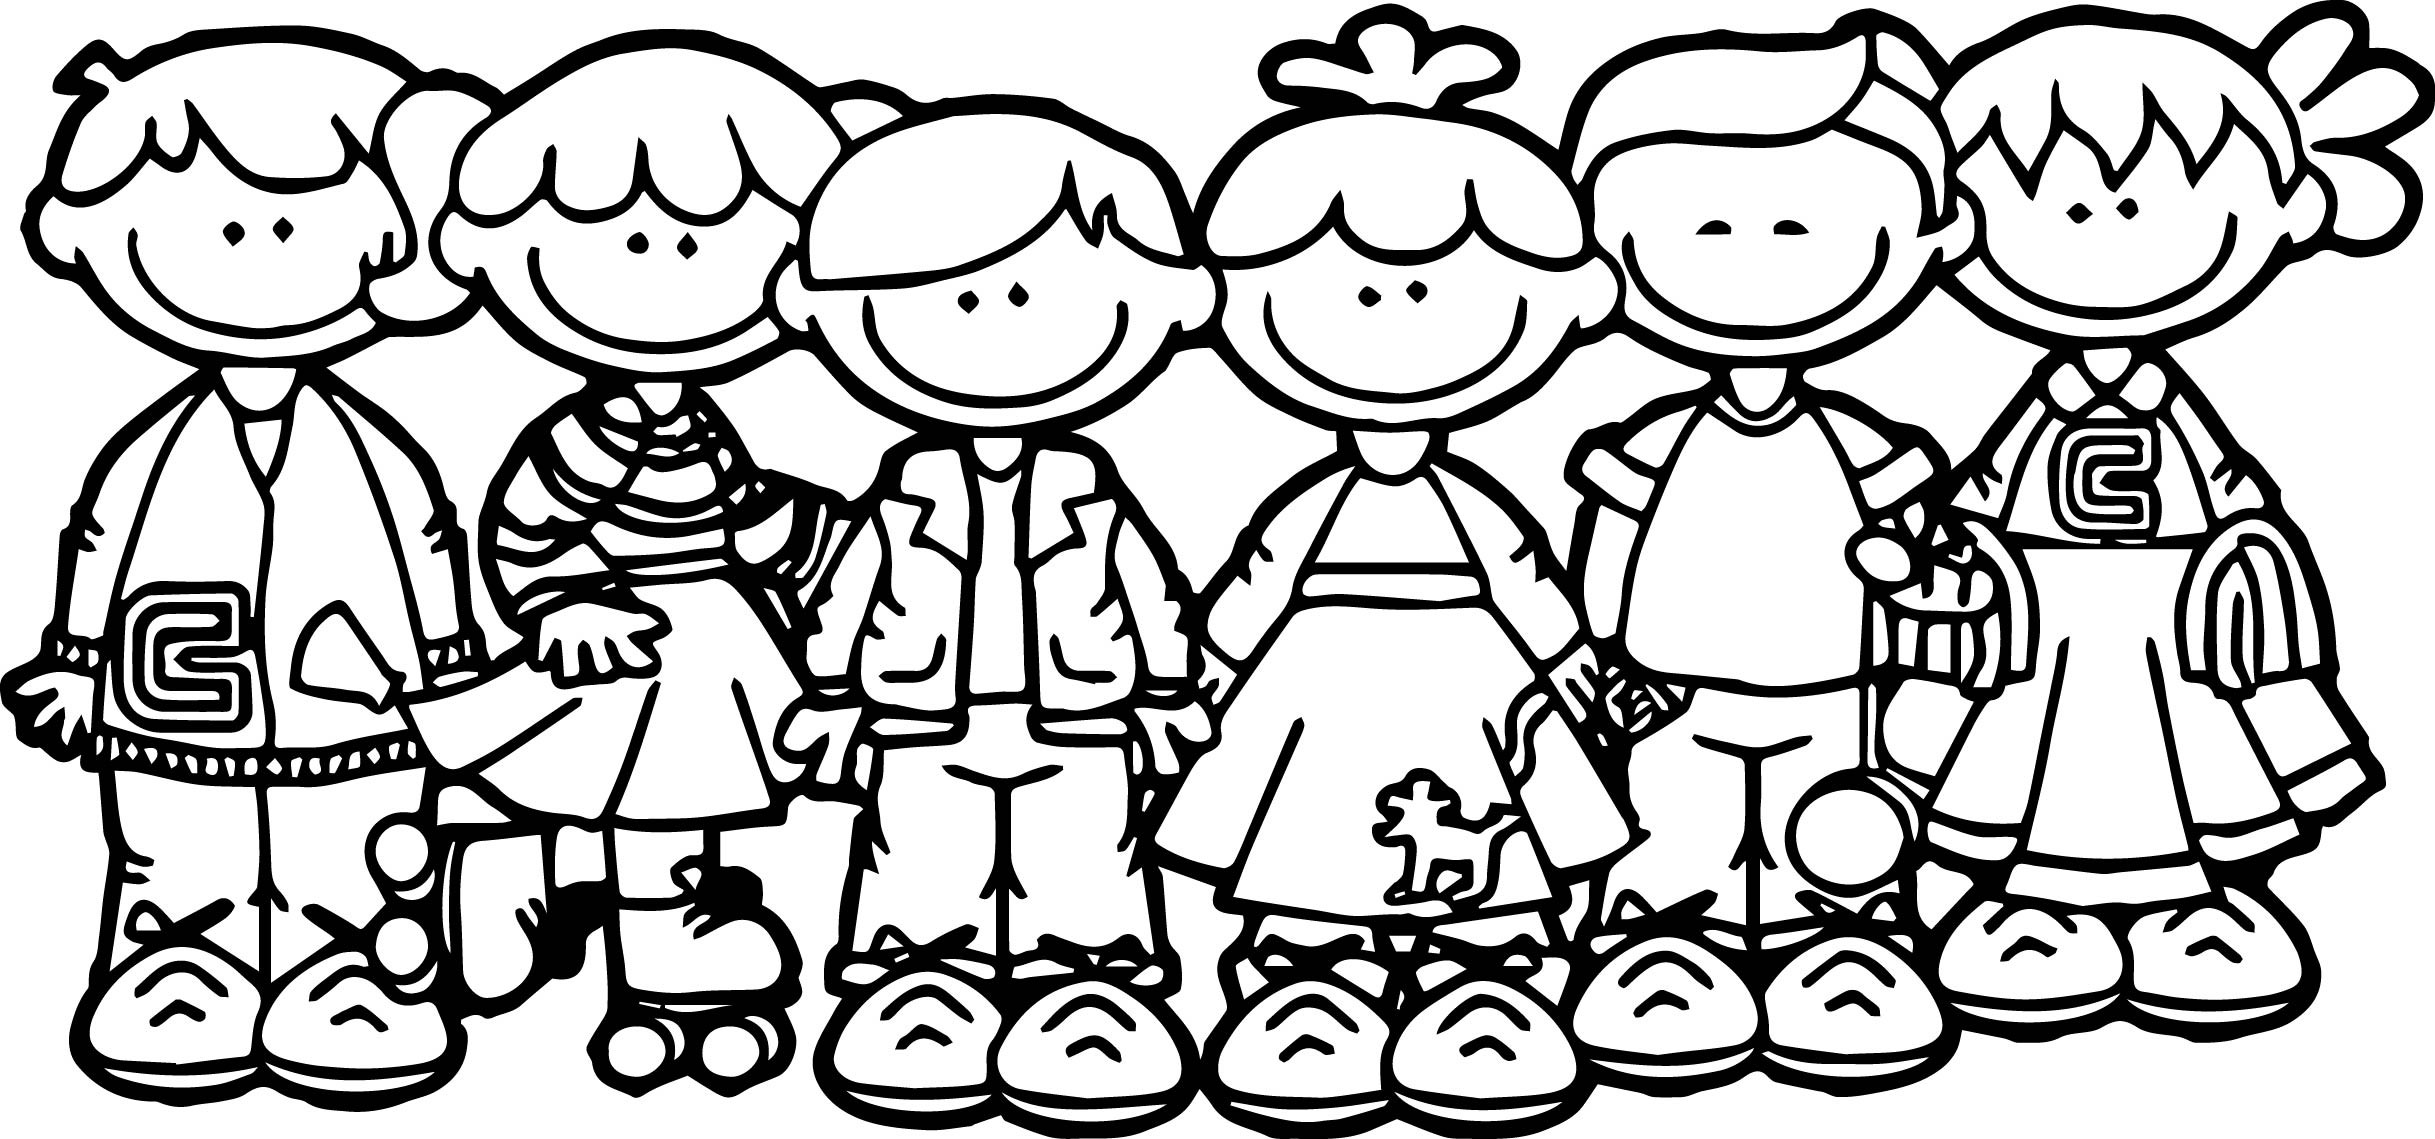 School Coloring Pages For Kids Coloring Pages